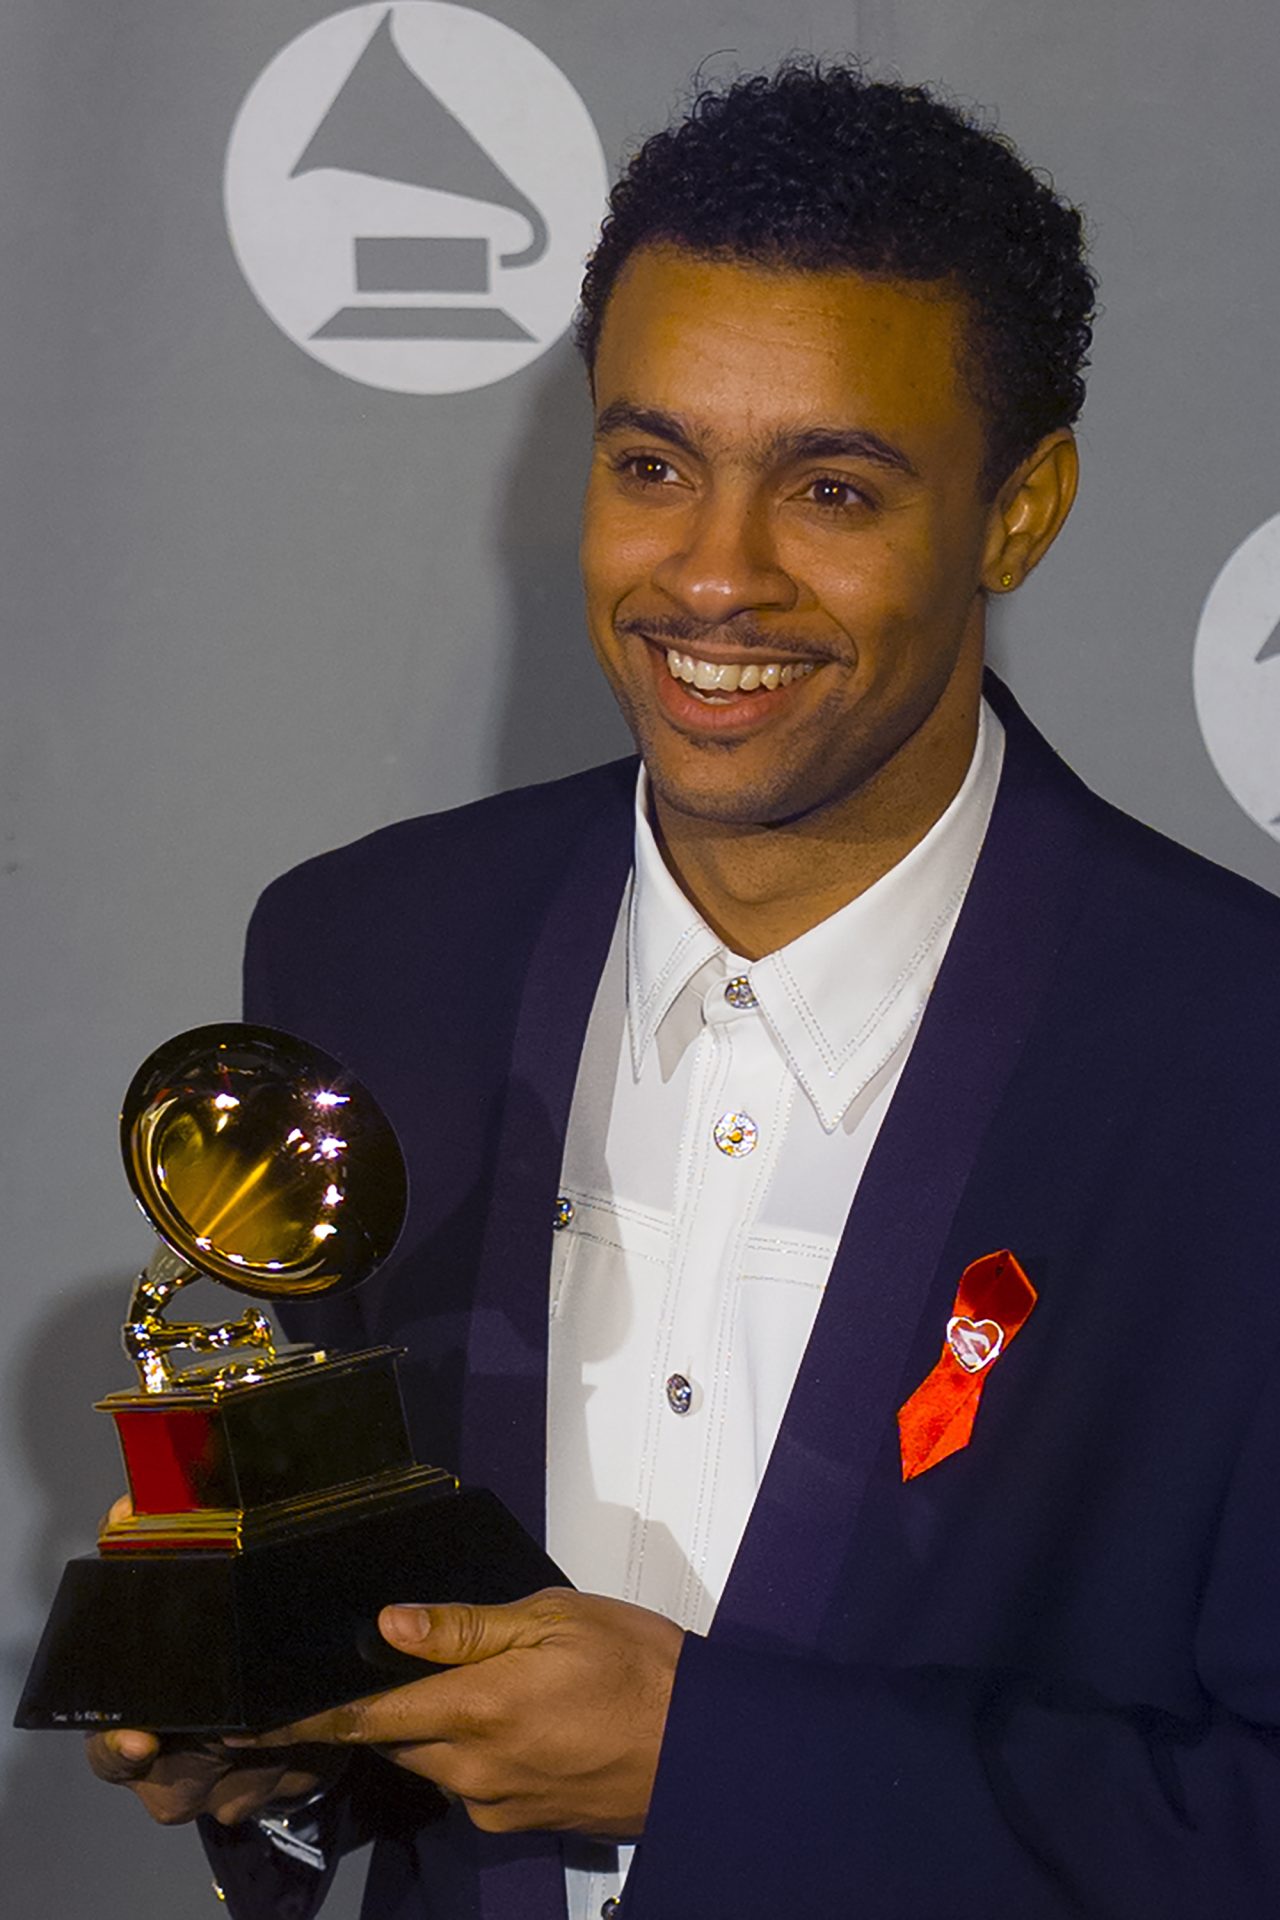 He won his first Grammy award in 1996